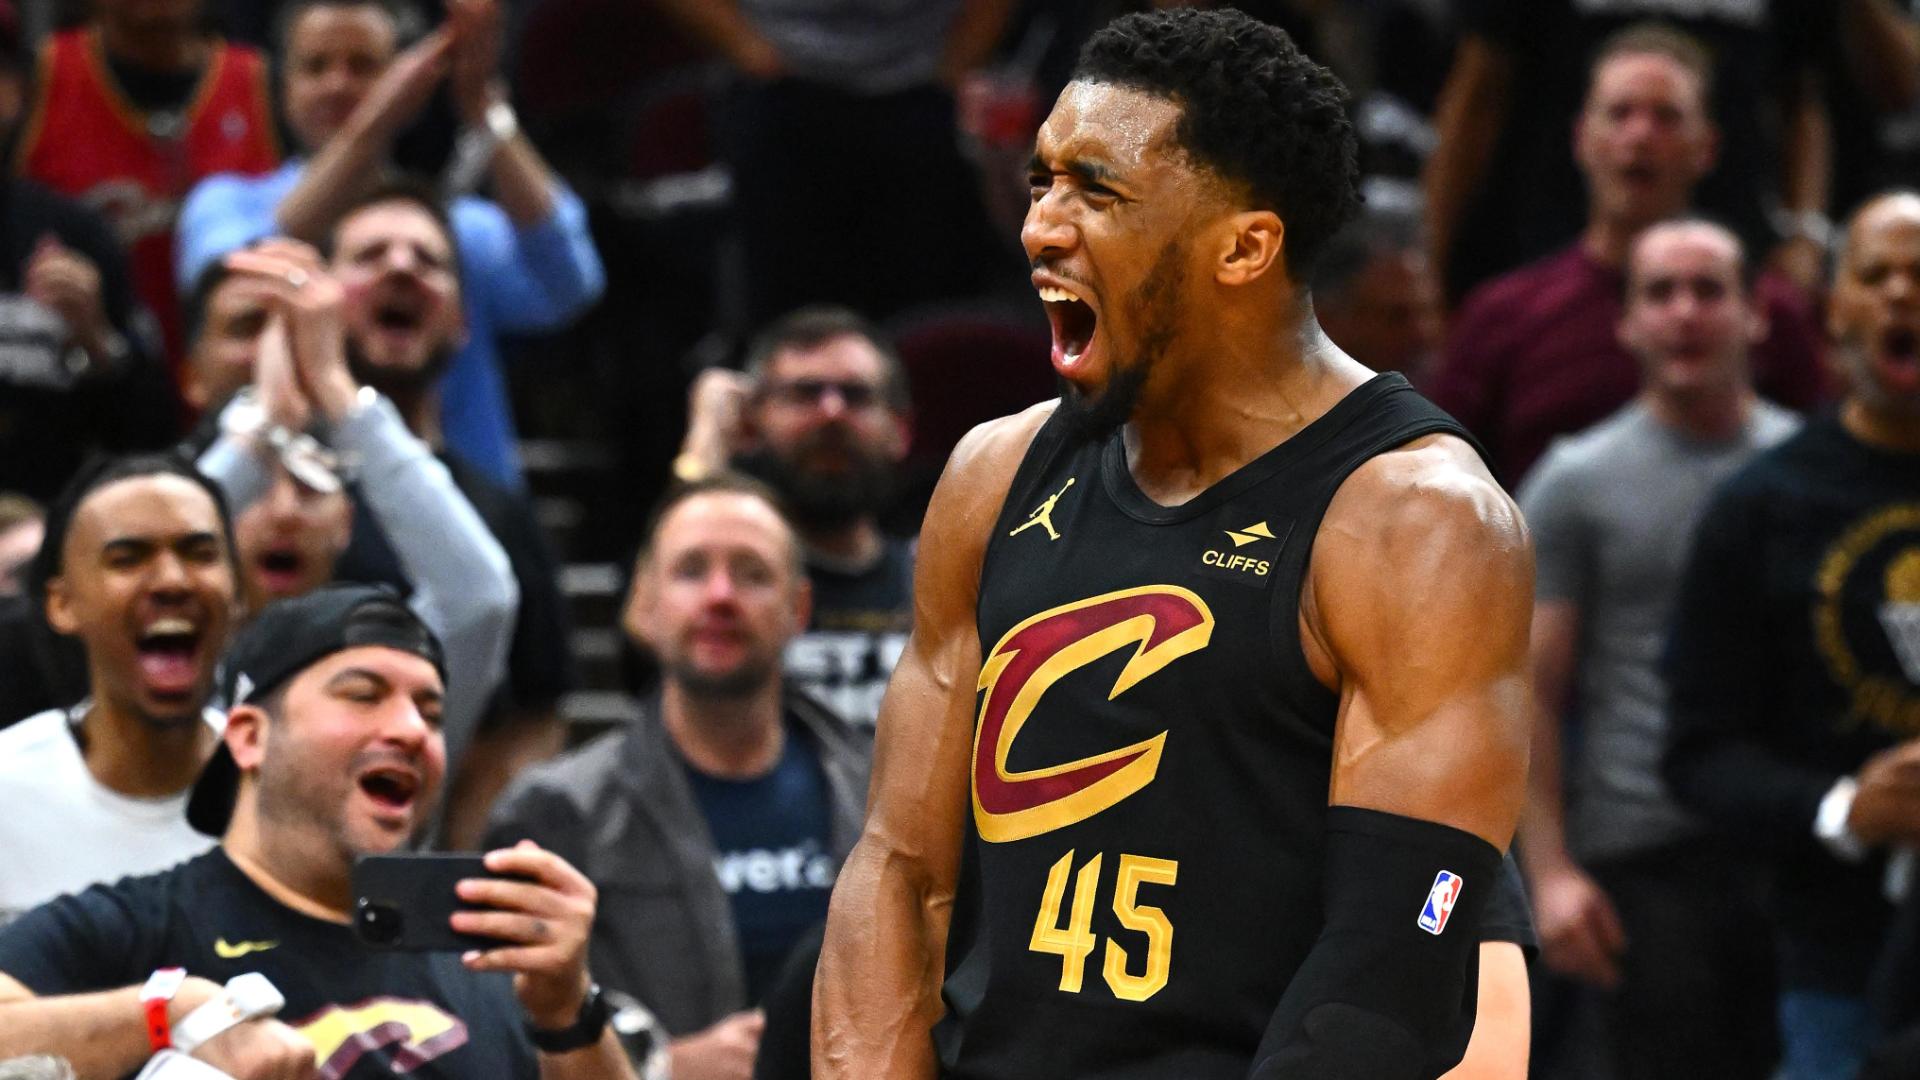 Donovan Mitchell scores 39 points in Game 7 to help the Cavaliers eliminate the Magic.